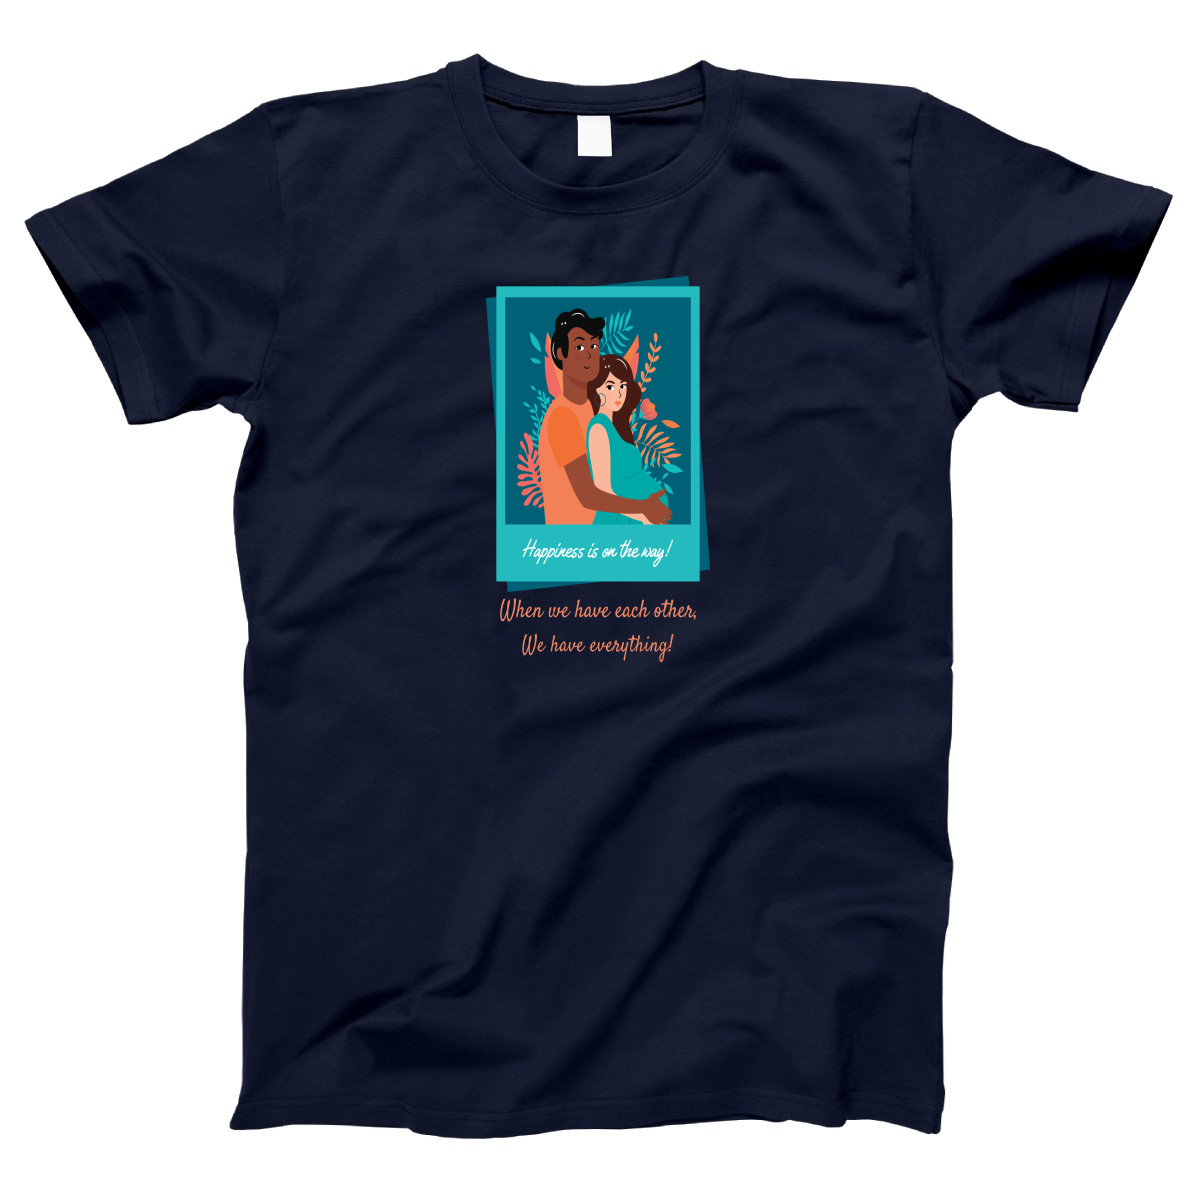 Happiness is on the way Women's T-shirt | Navy